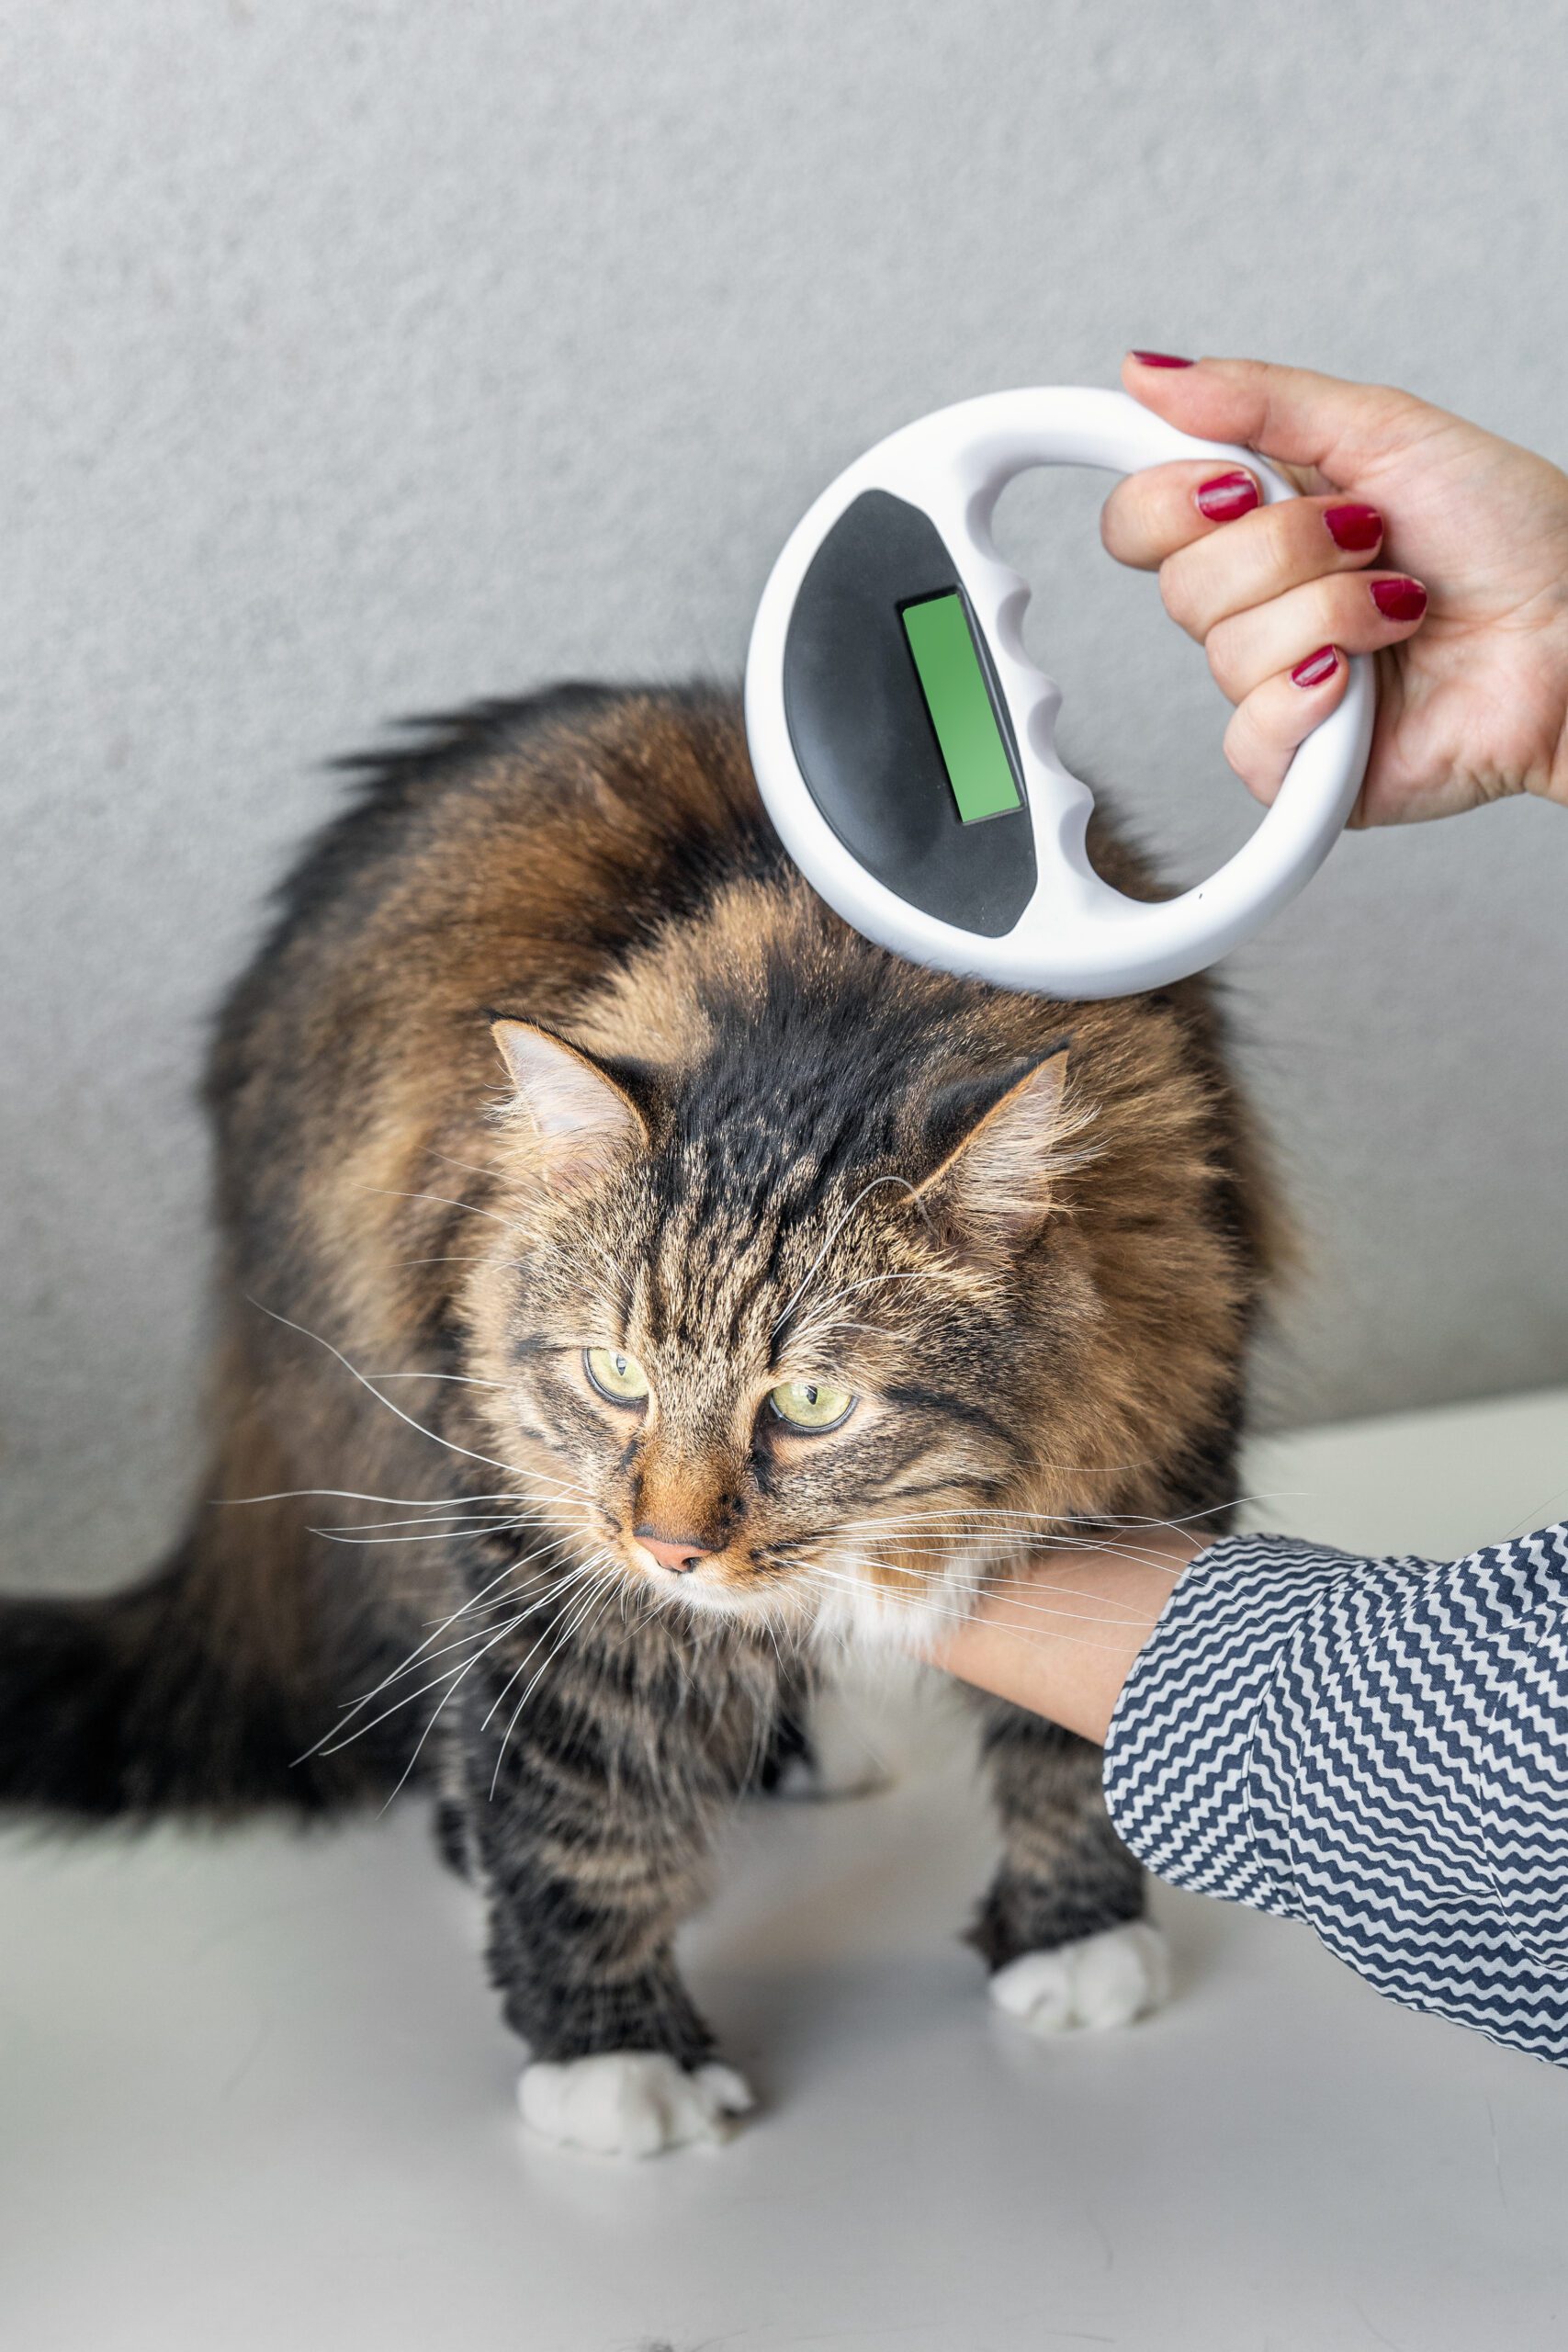 scanning a cat microchip to aid reunification